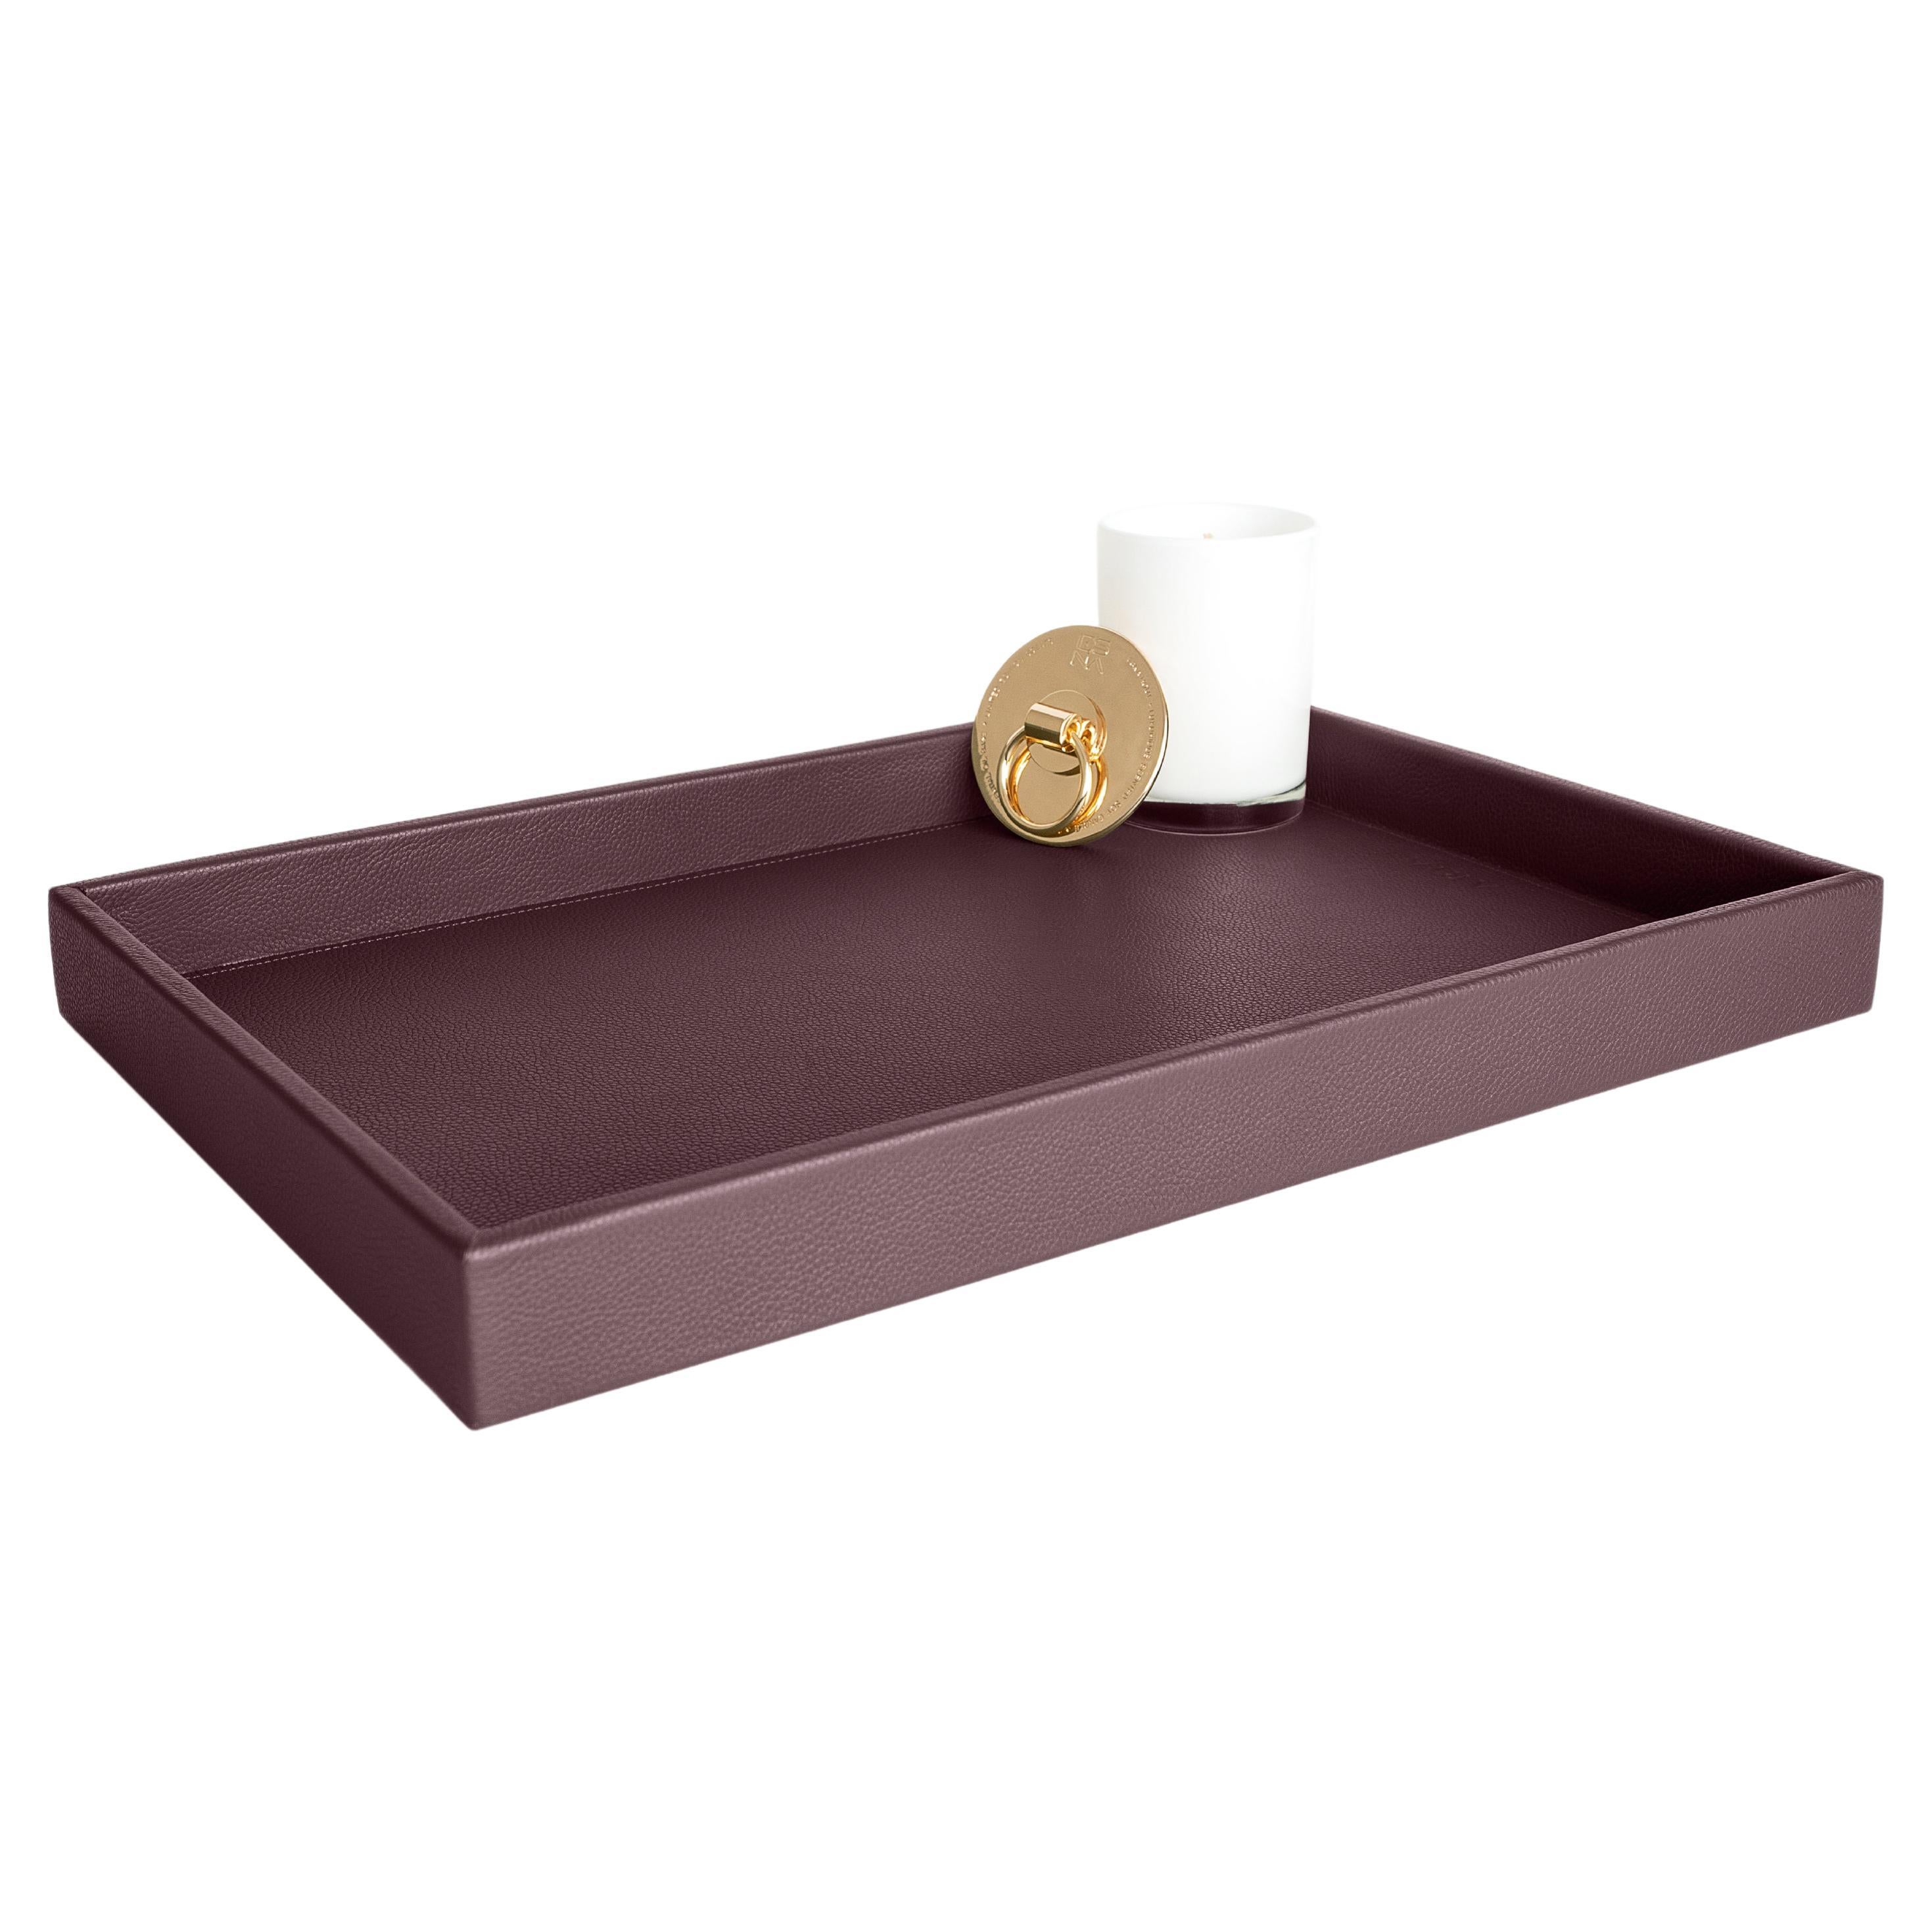 Leather Tray, Large A Rectangular Tray, Handmade in Brazil - Color: Wine For Sale